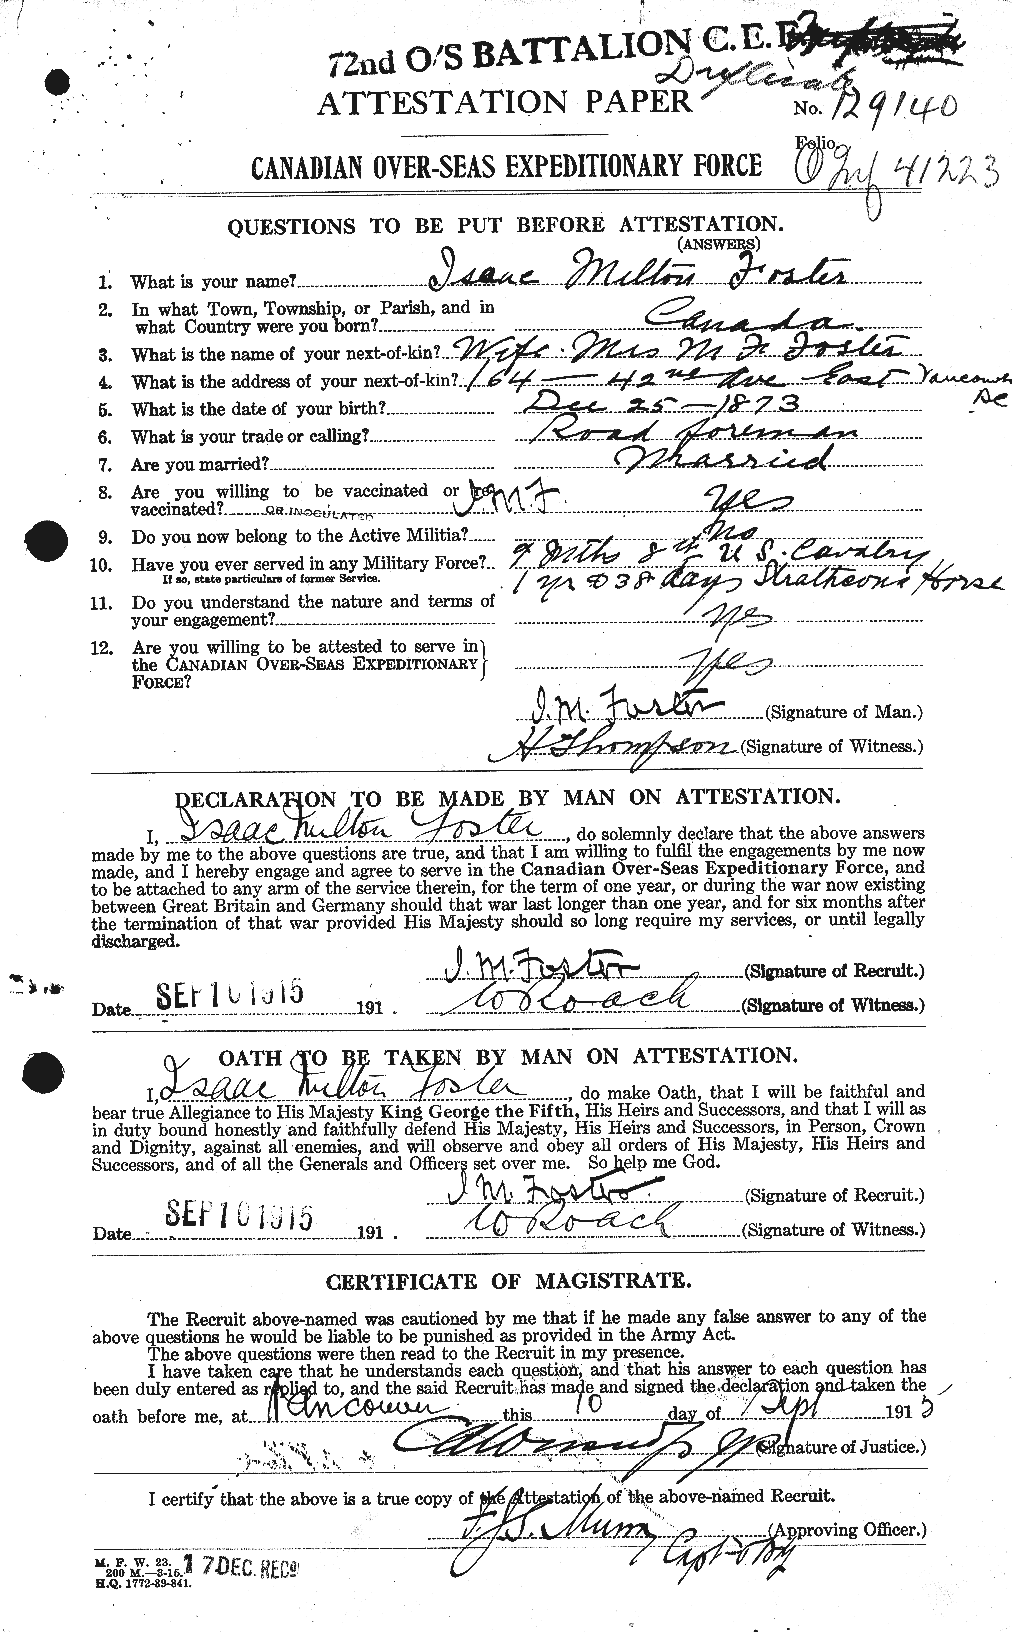 Personnel Records of the First World War - CEF 333271a